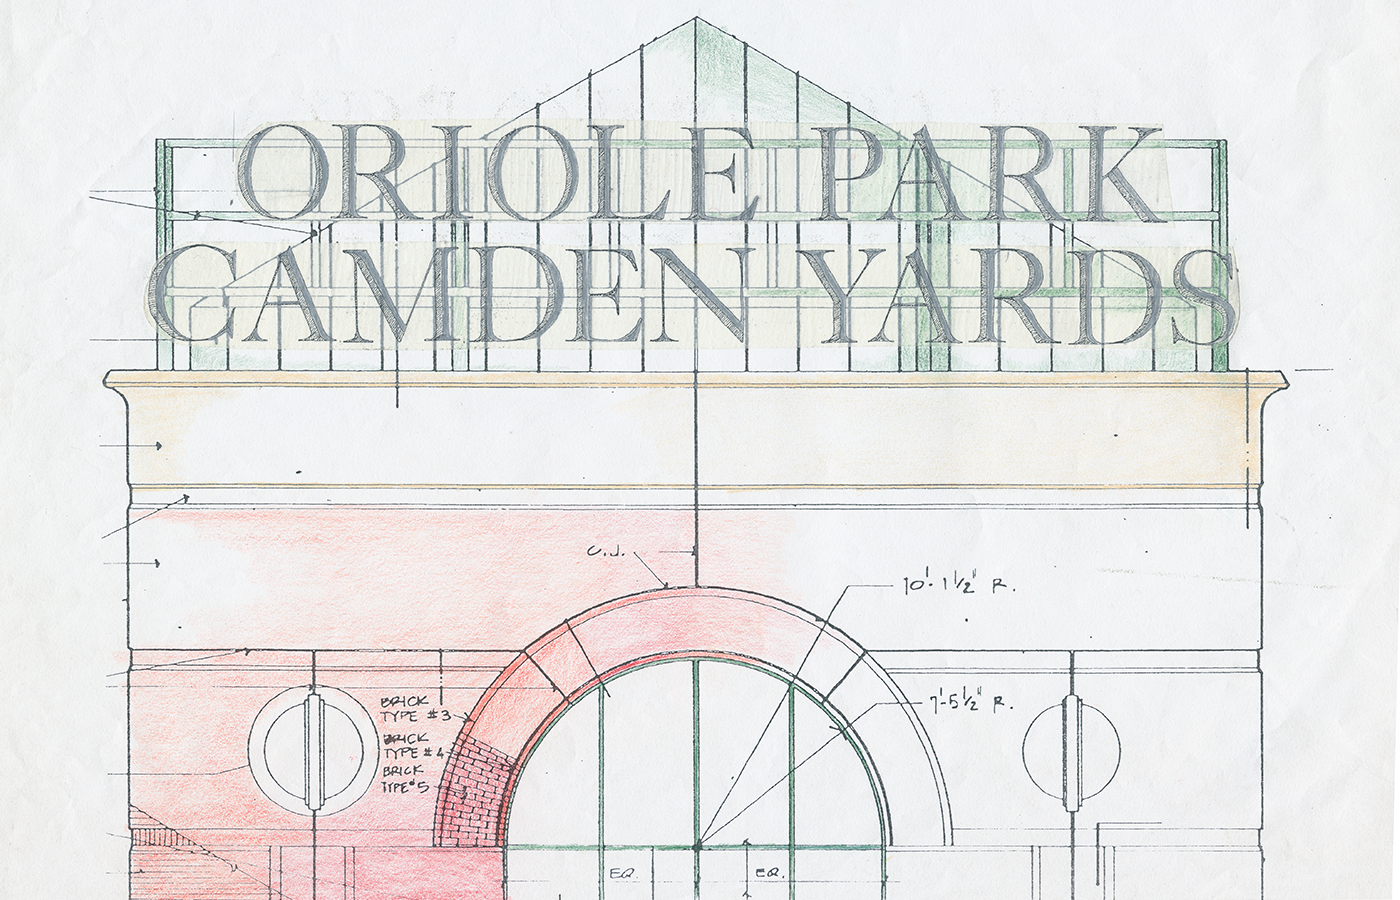 a sketch of the entrance sign at camden yards